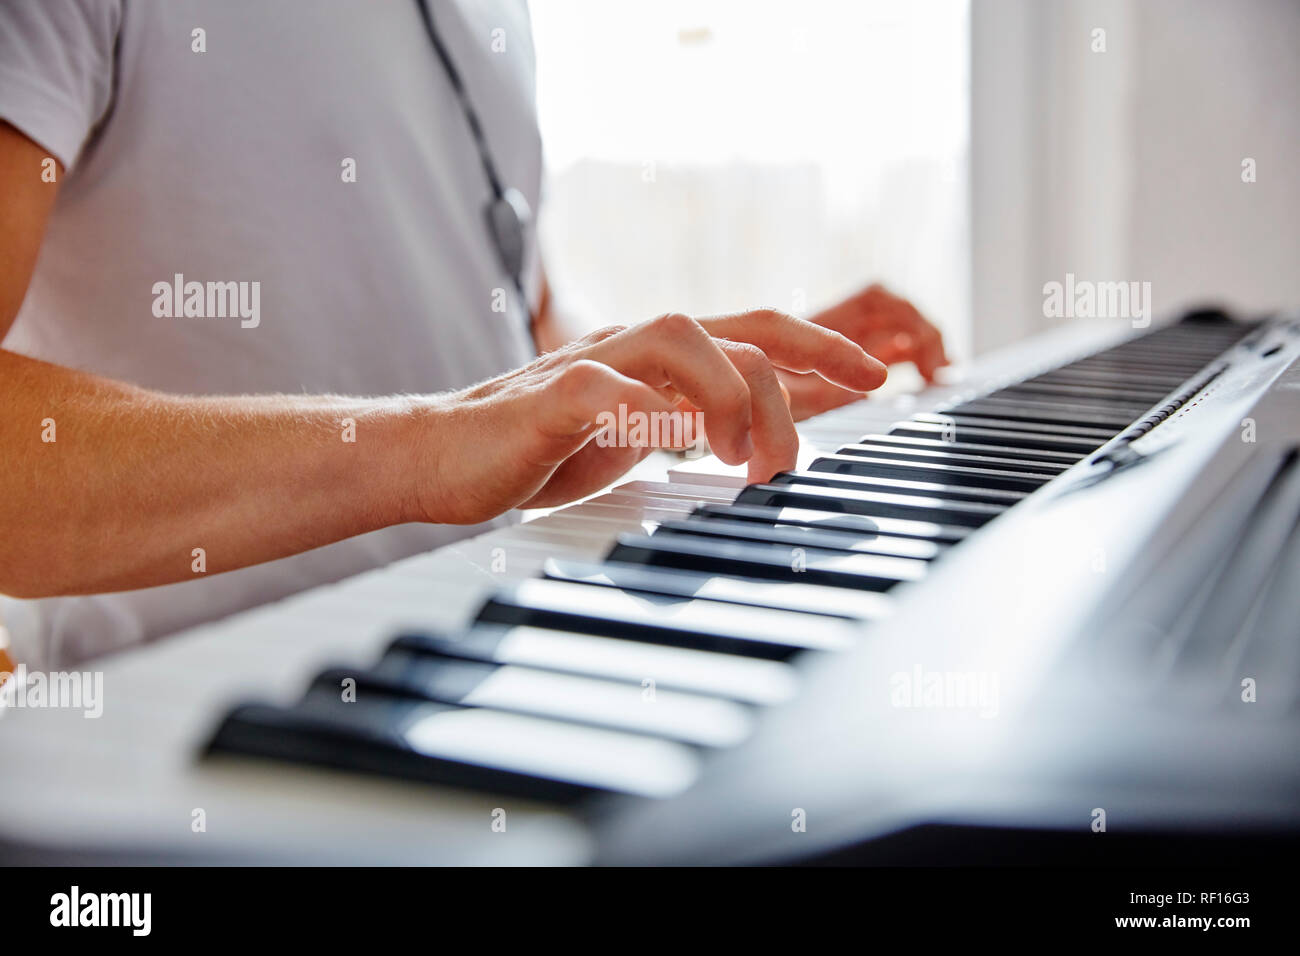 Hands of man playing digital piano Stock Photo